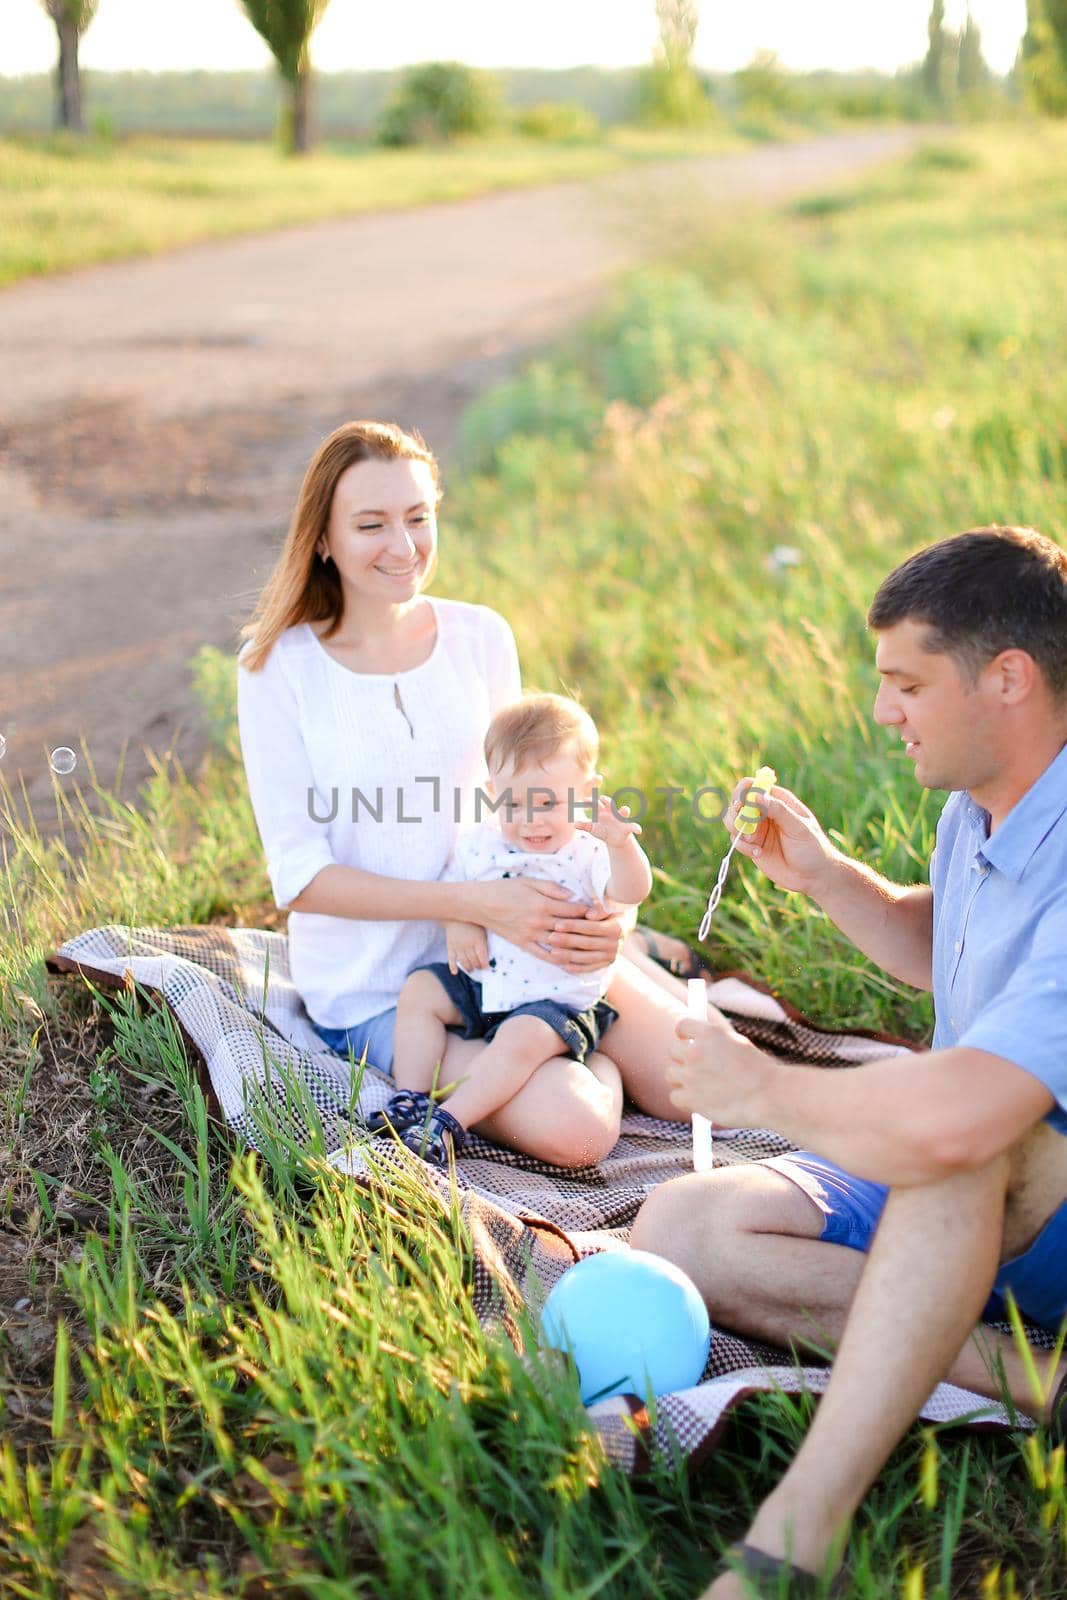 Young smiling mother and father sittling on grass with little baby and blowing bubbles. Concept of picnic and children, parenthood and leisure time.